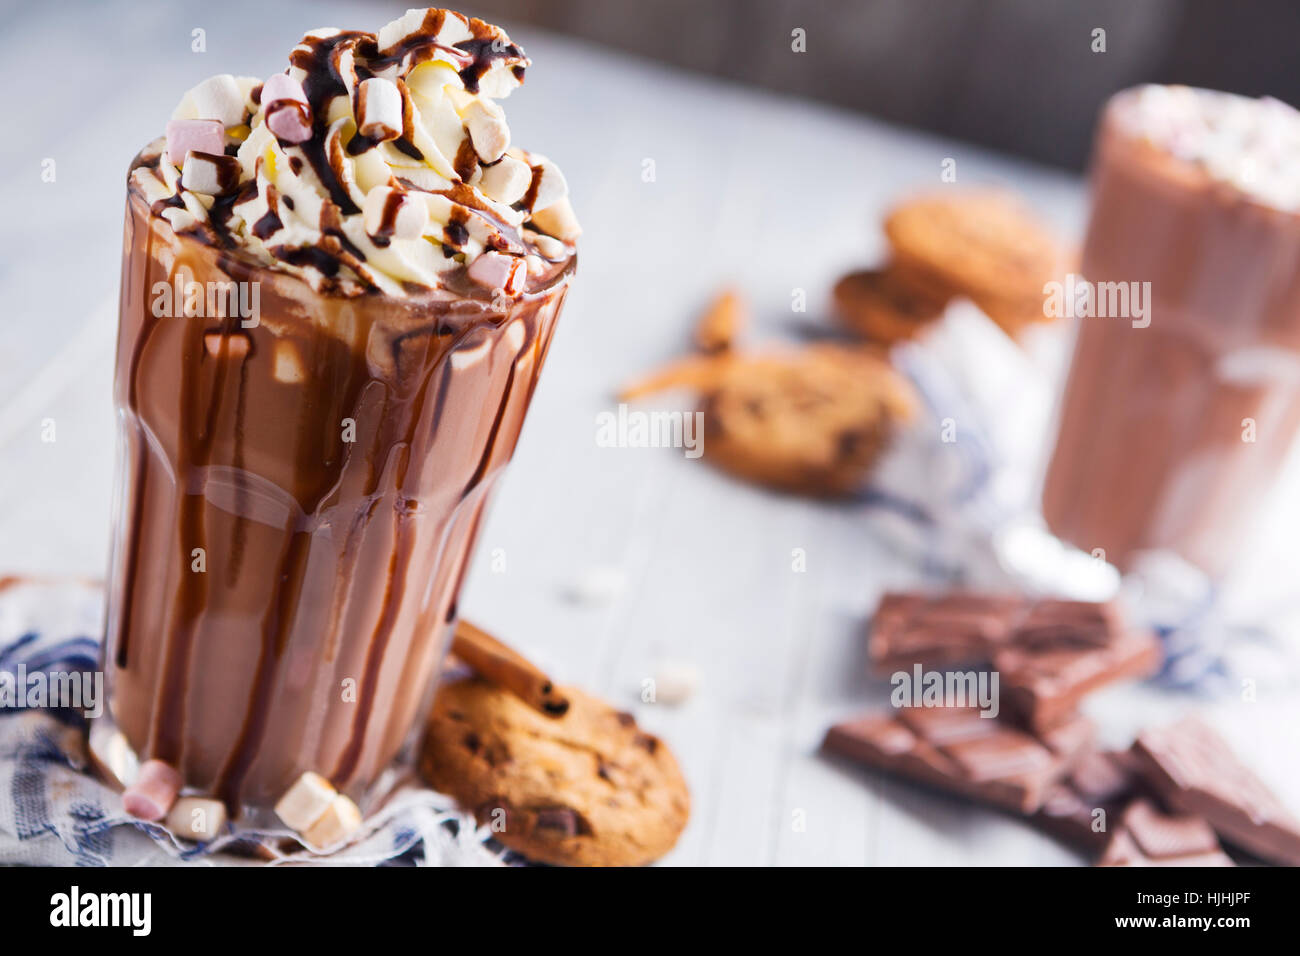 A messy glass with hot chocolate, whipped cream, marshmallows and chocolate chip cookies. Stock Photo